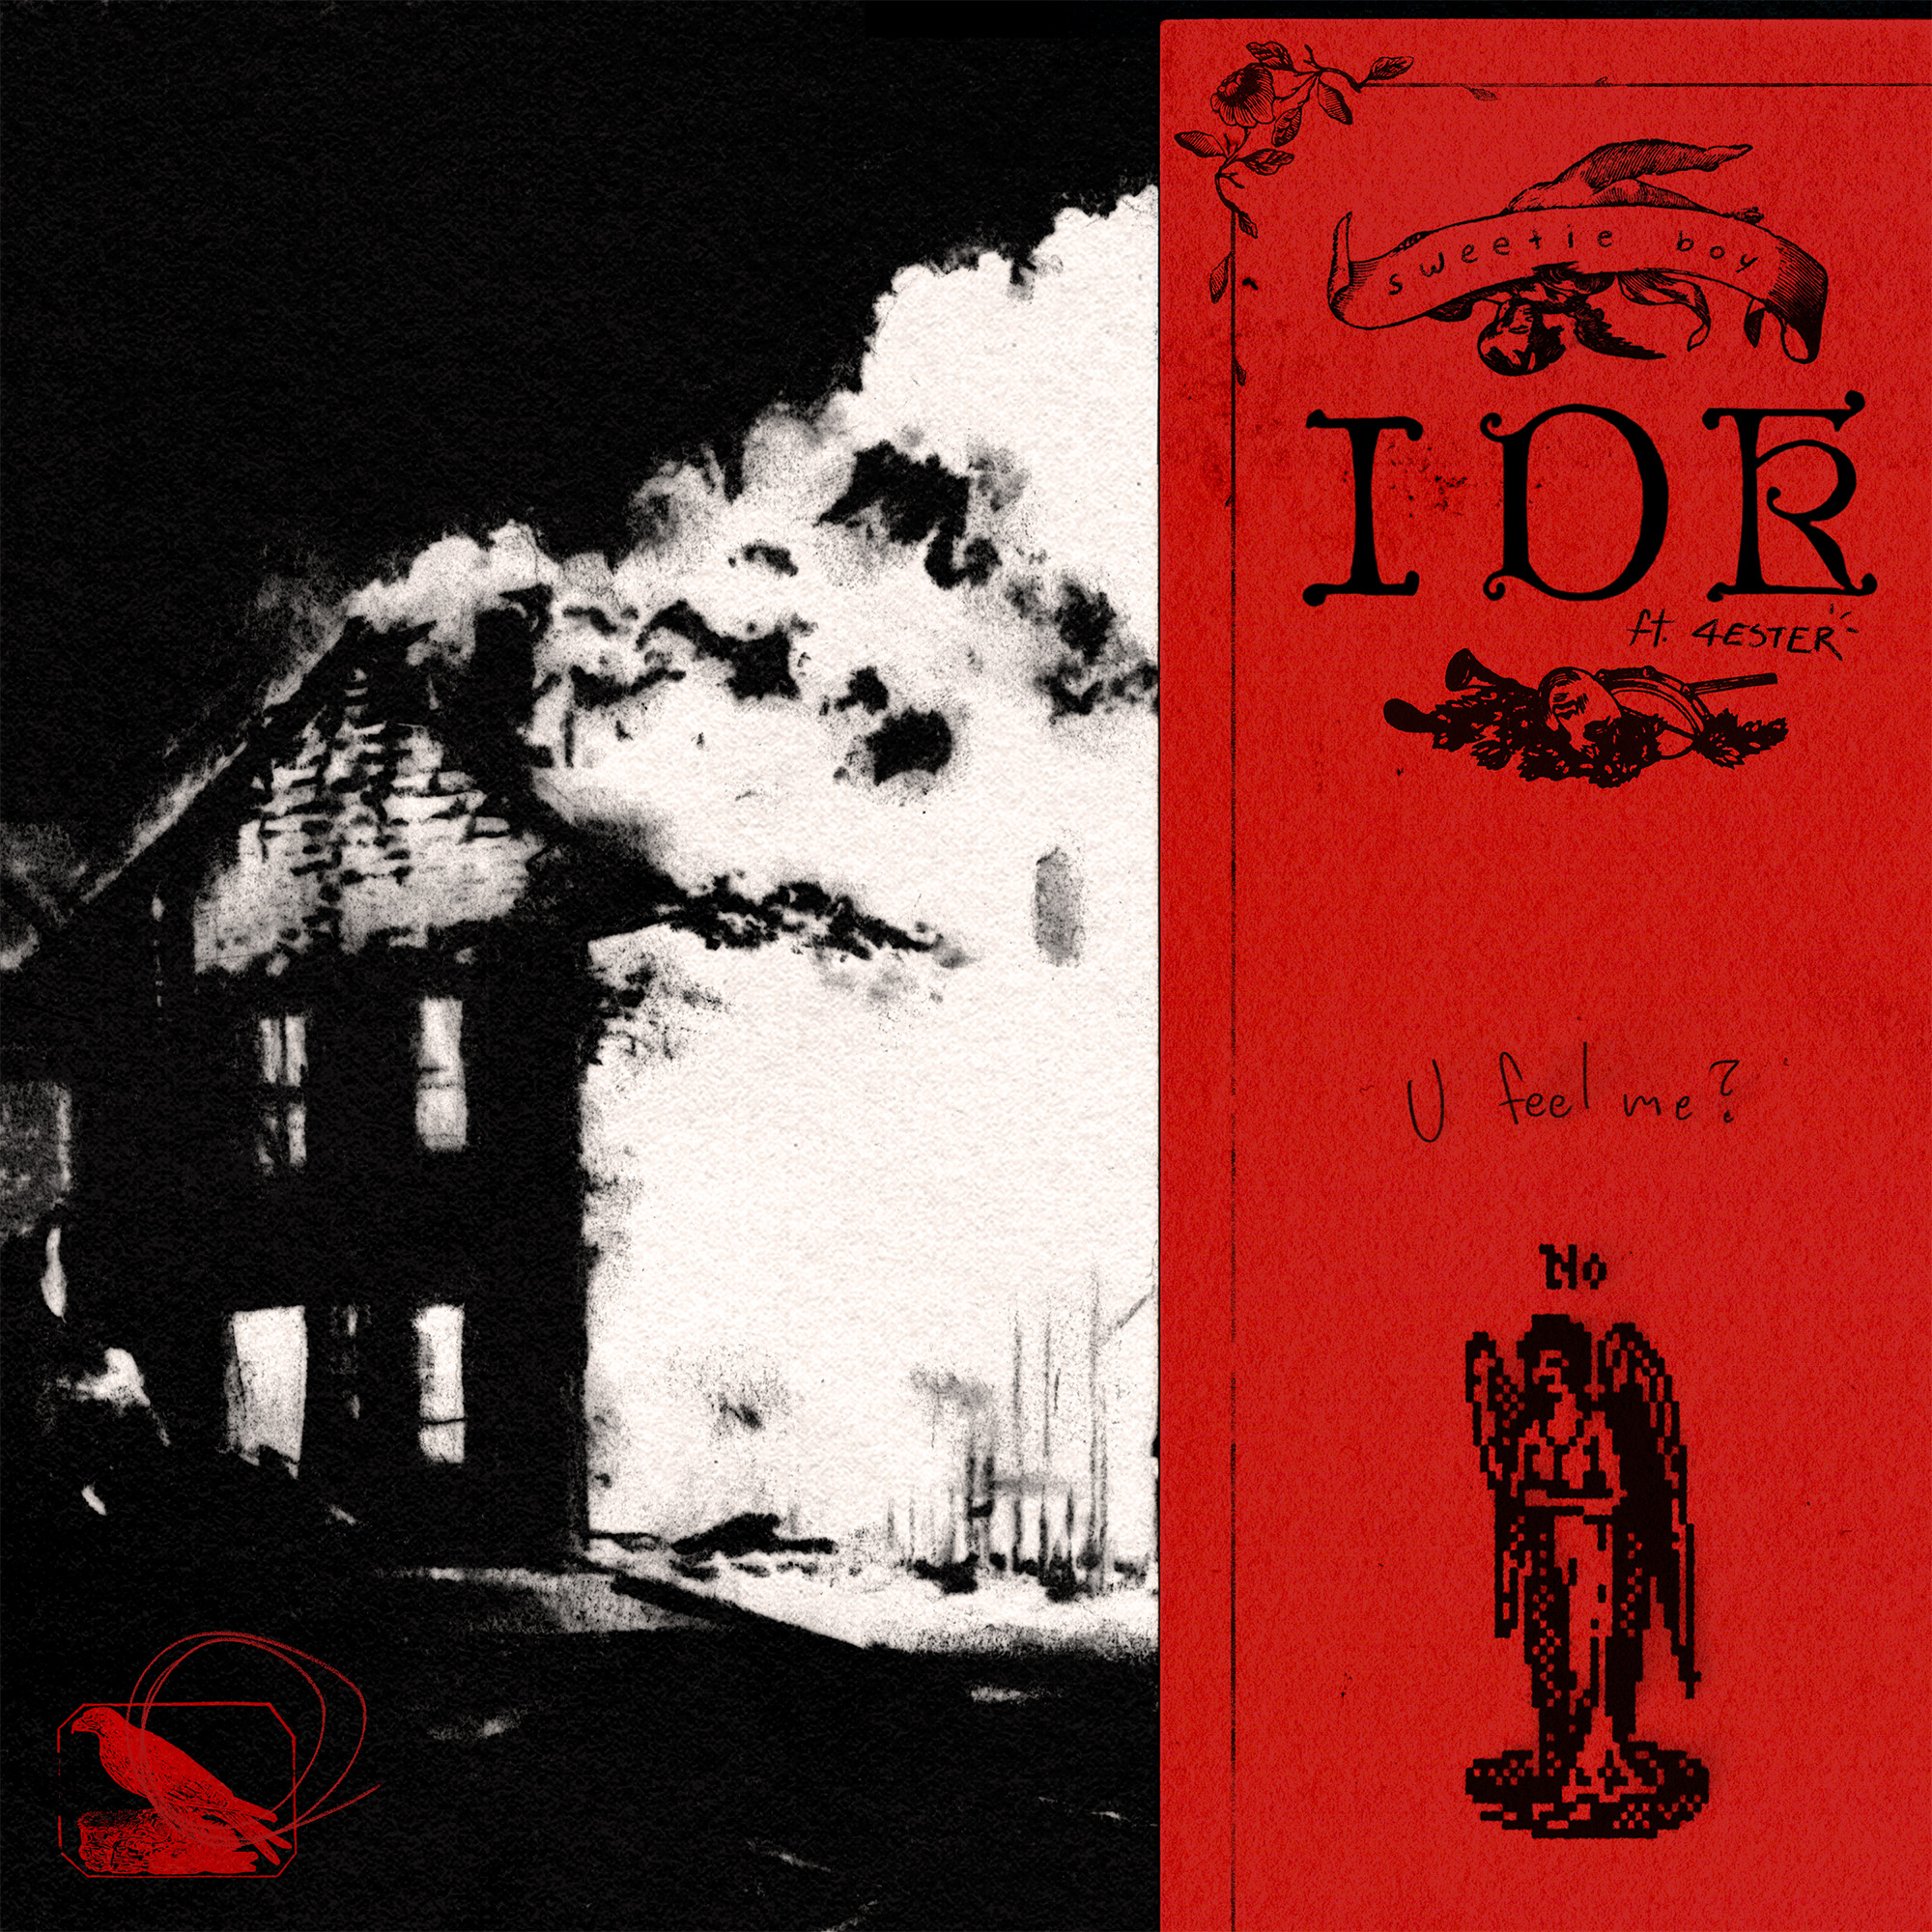 A single cover for the song IDK by Sweetie Boy featuring Forester, showing black and white illustration of a house, with a red section to the right with an angel illustration and the letters IDK.